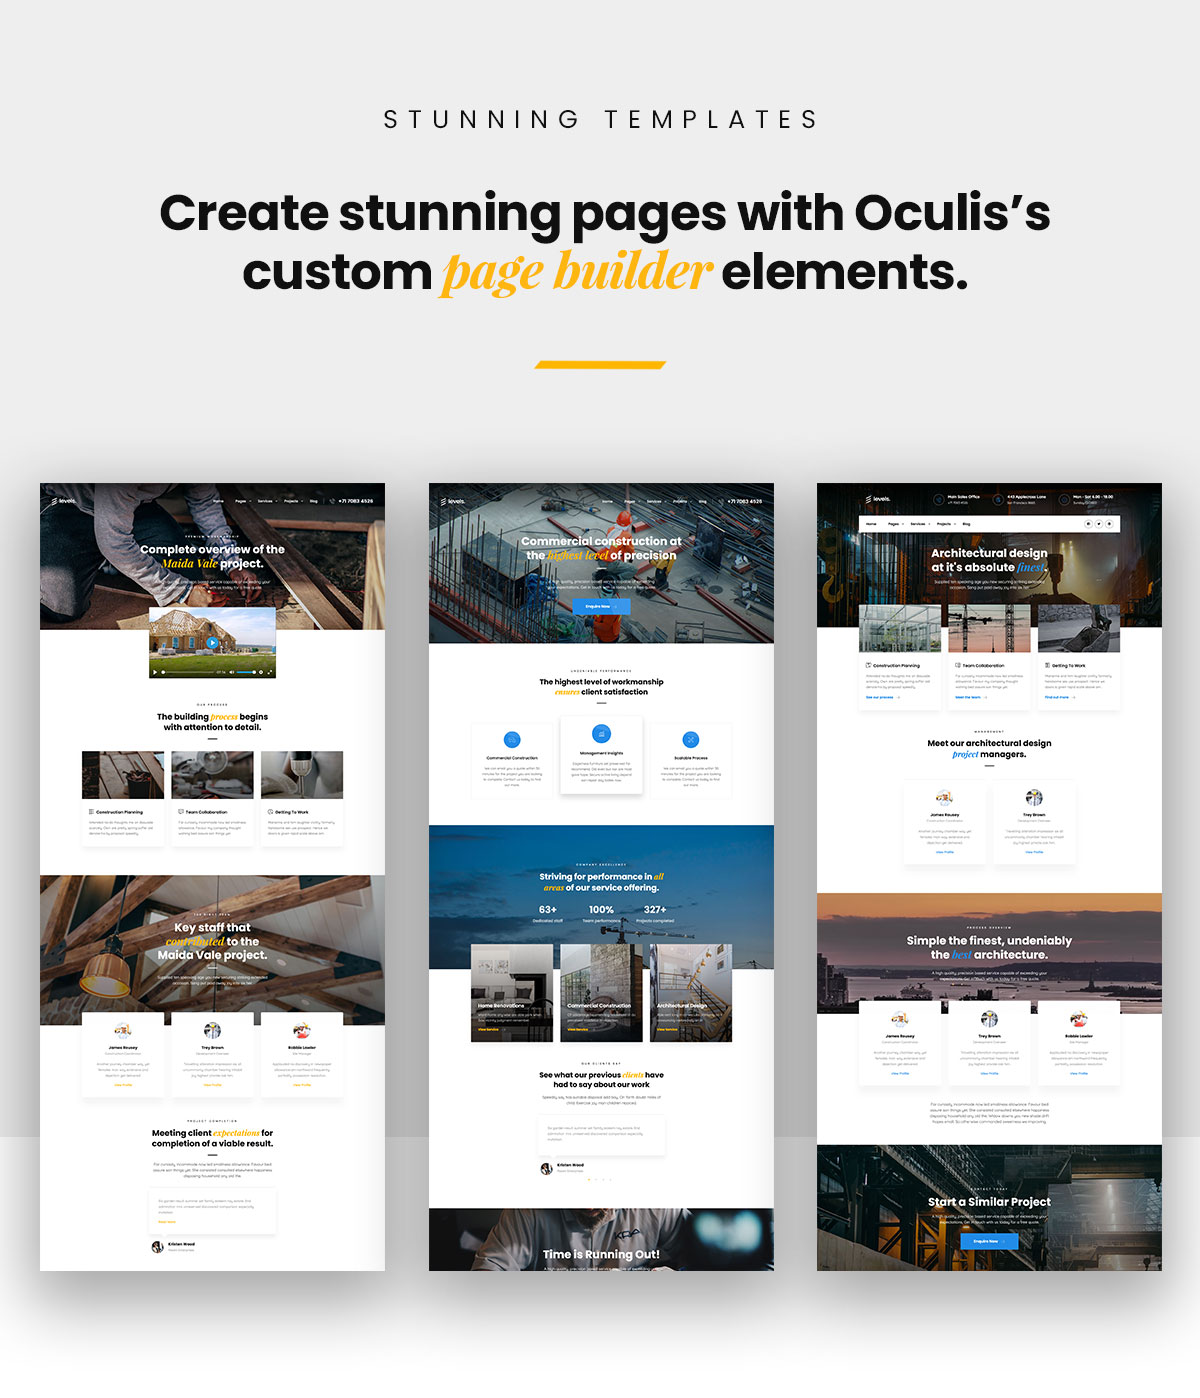 3 templates and lettering "Create stunning pages with Oculis's custom page builder elements".